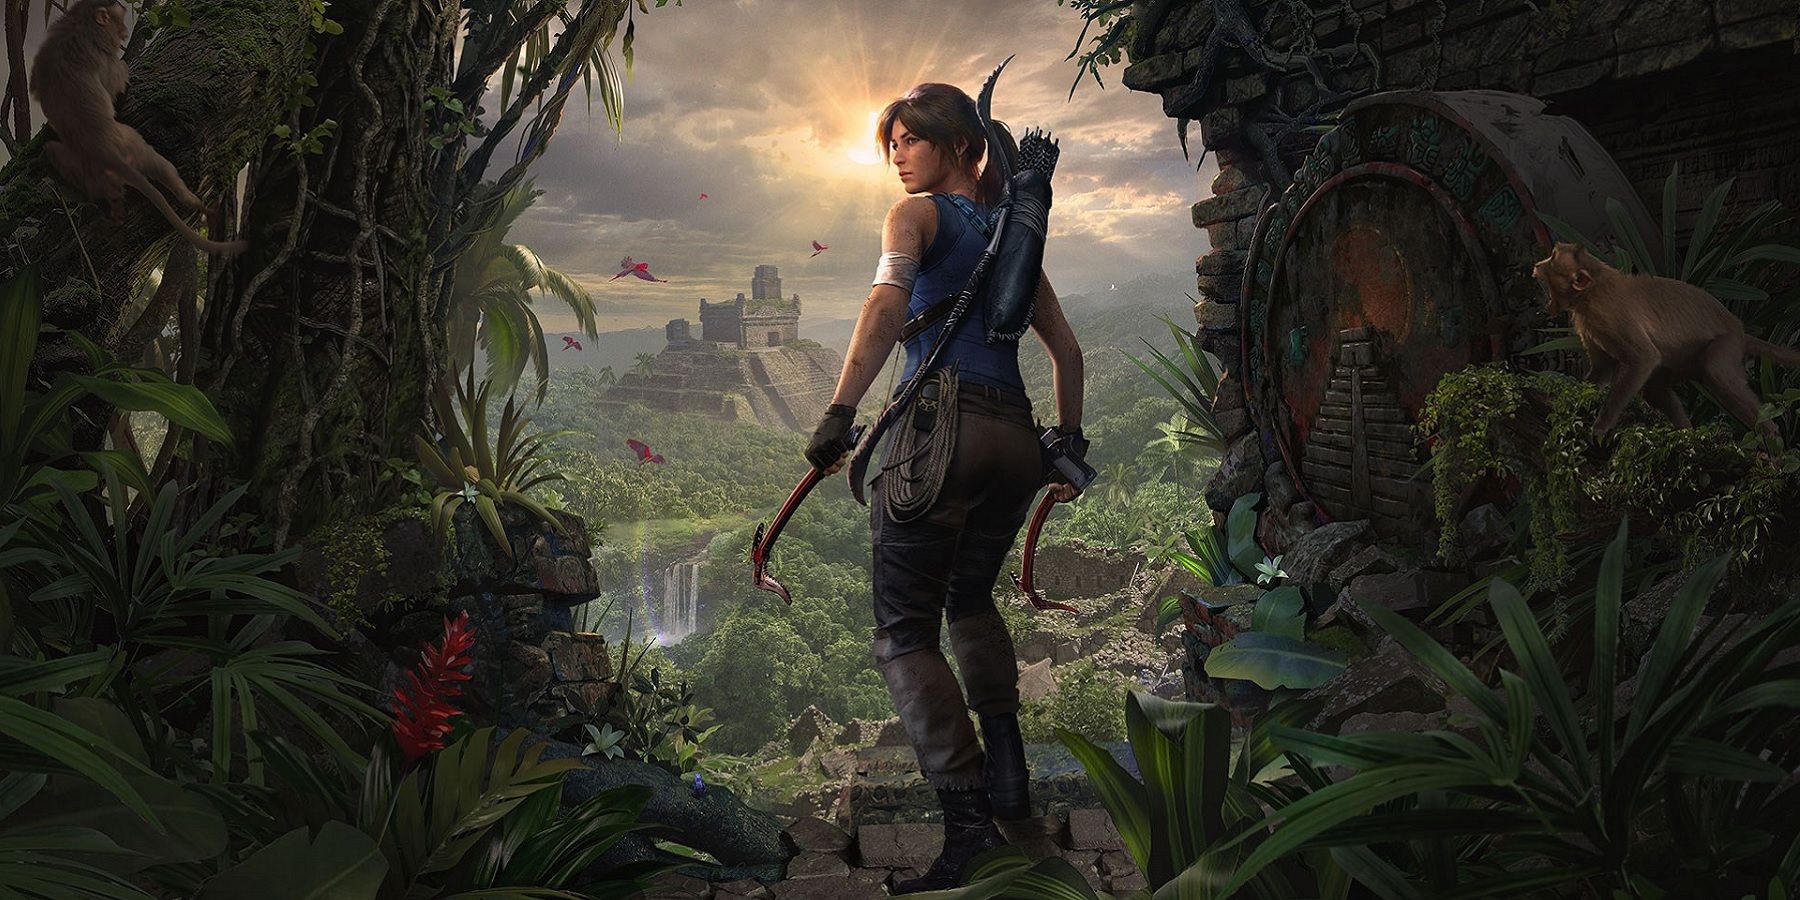 shadow of the tomb raider definitive edition ps plus